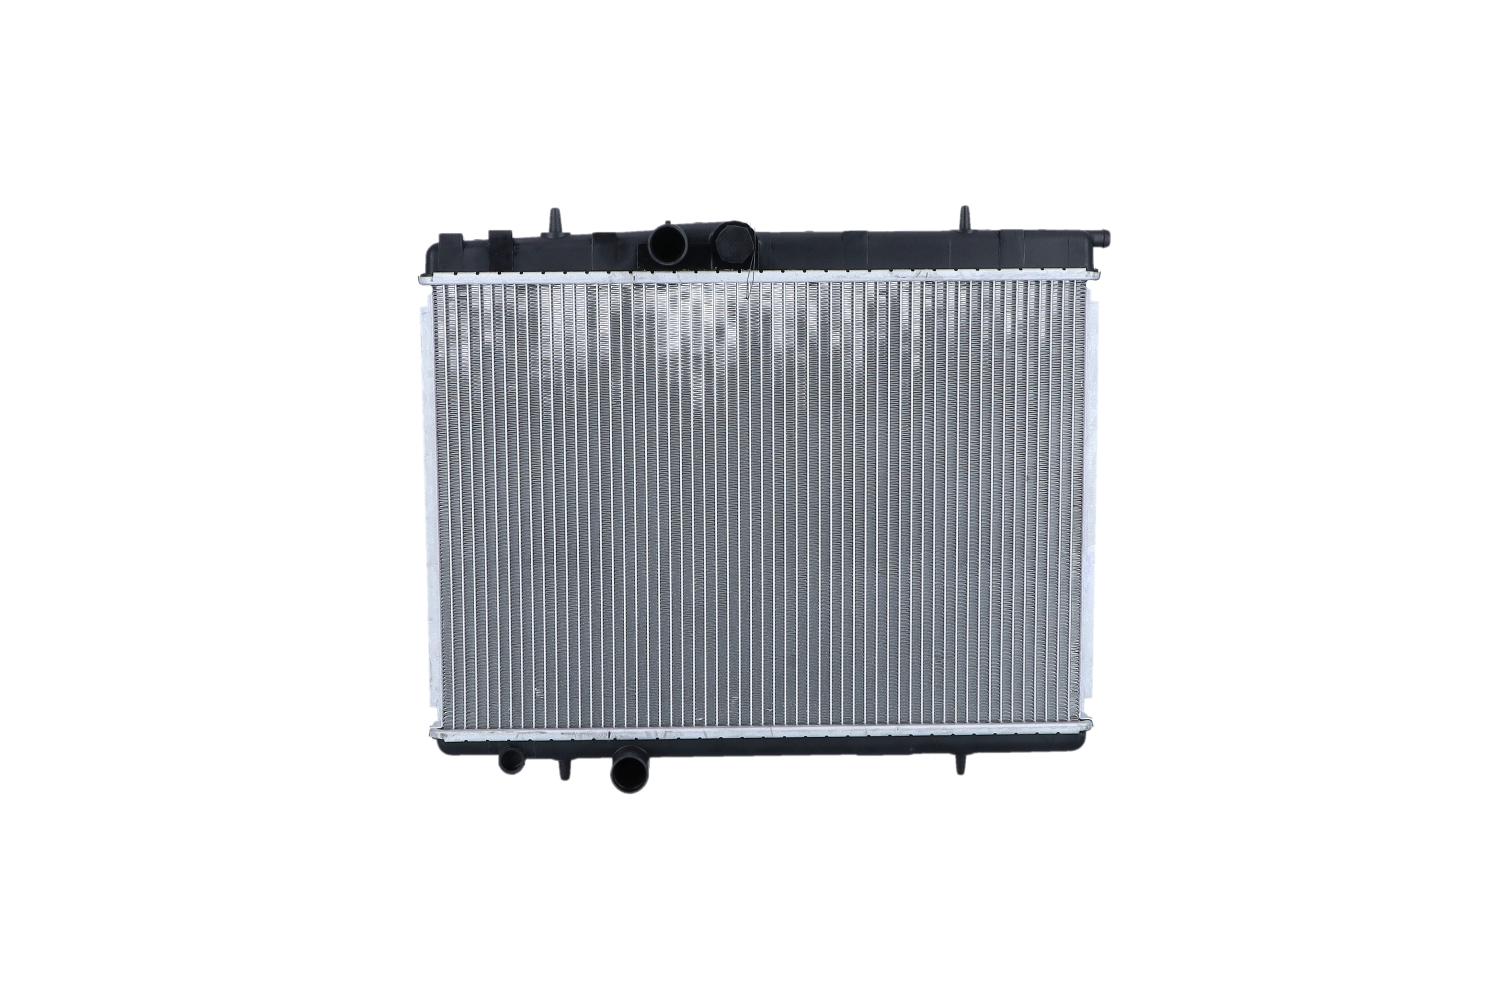 NRF EASY FIT 53120 Engine radiator Aluminium, 555 x 376 x 27 mm, with mounting parts, Brazed cooling fins